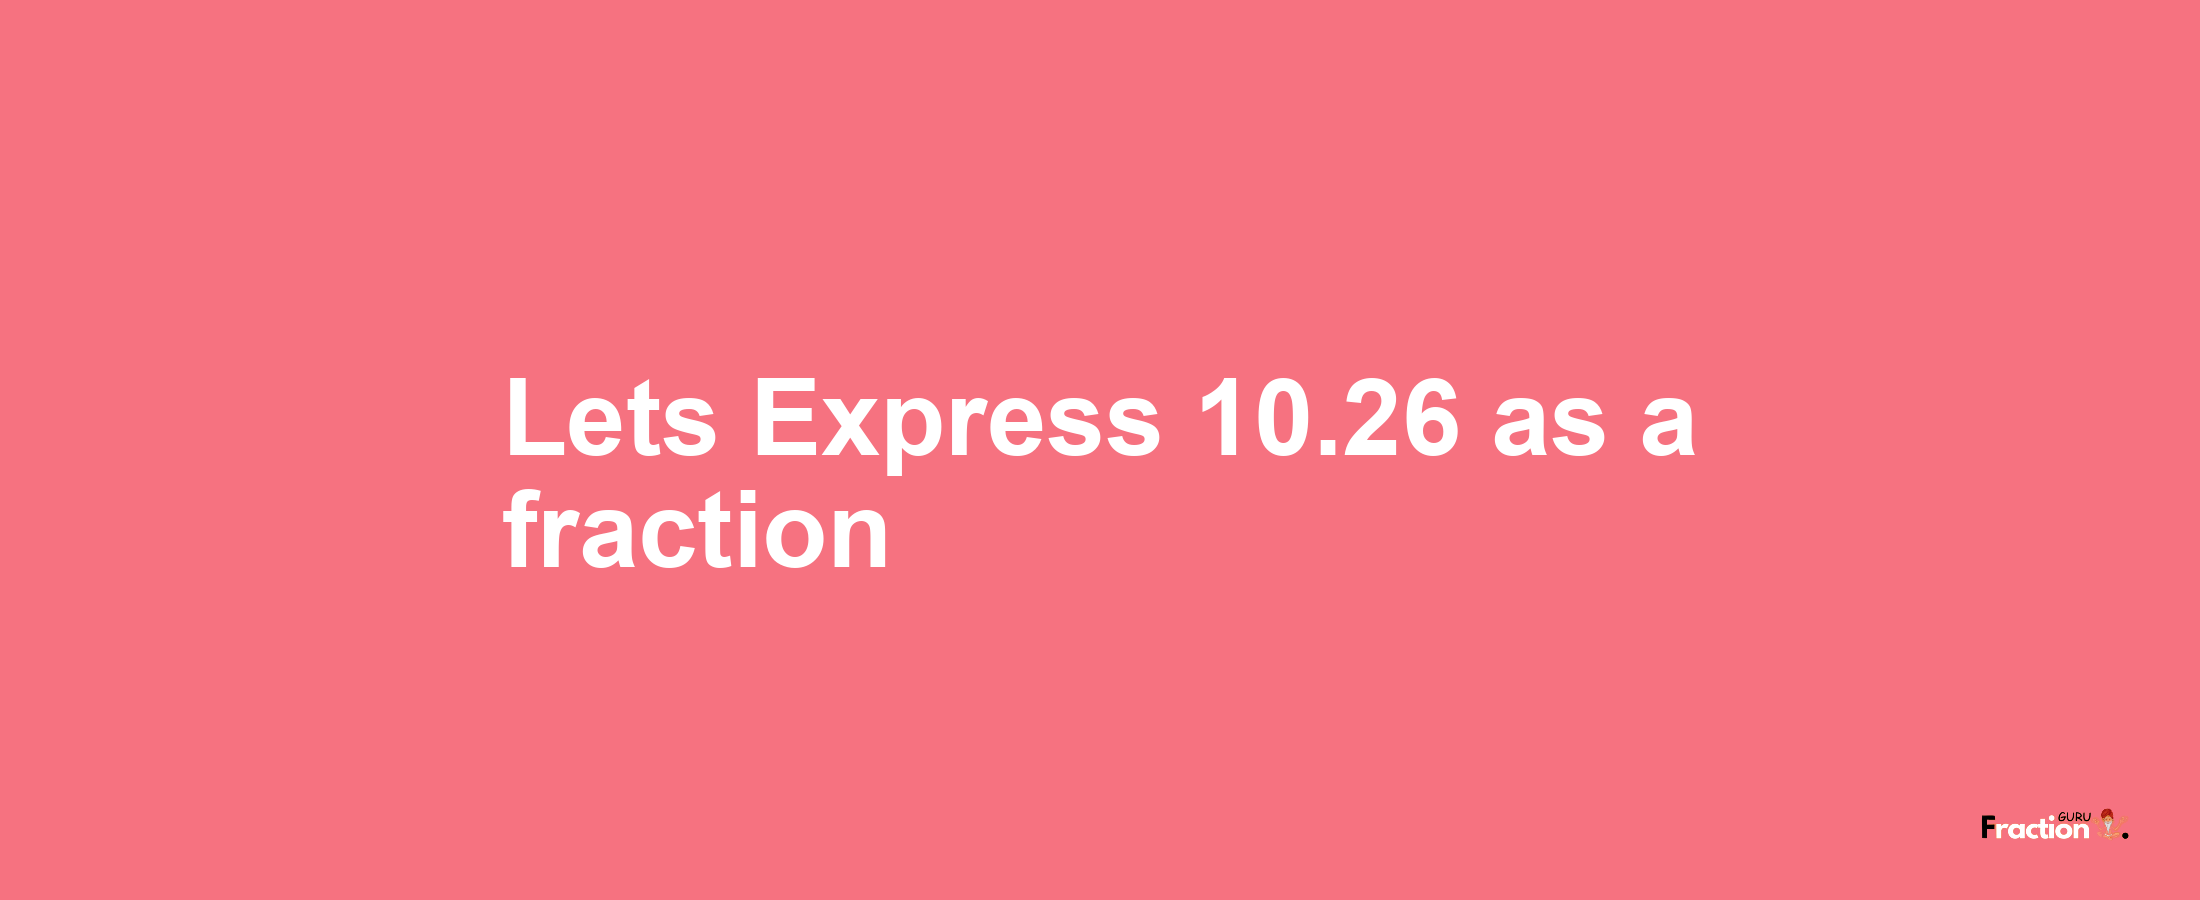 Lets Express 10.26 as afraction